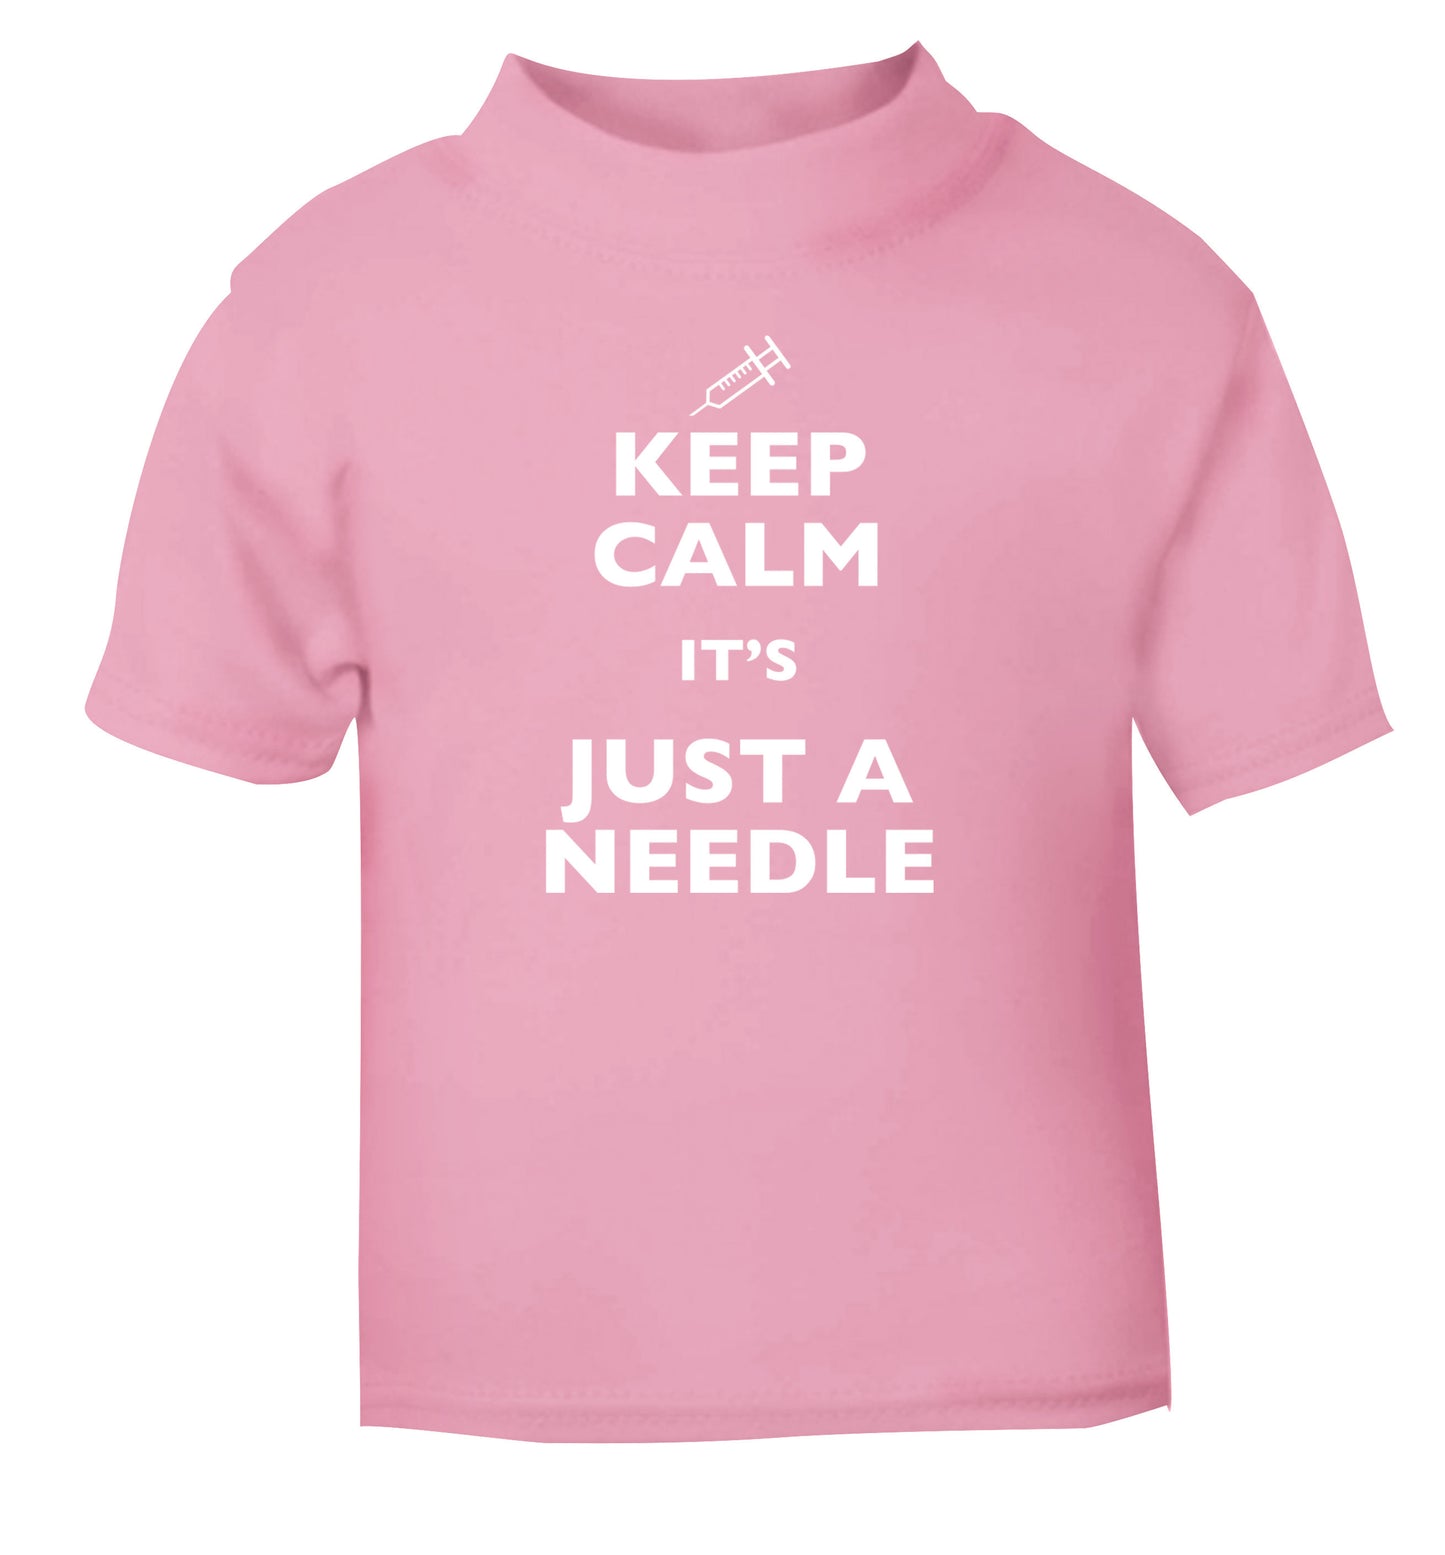 Keep calm it's only a needle light pink Baby Toddler Tshirt 2 Years